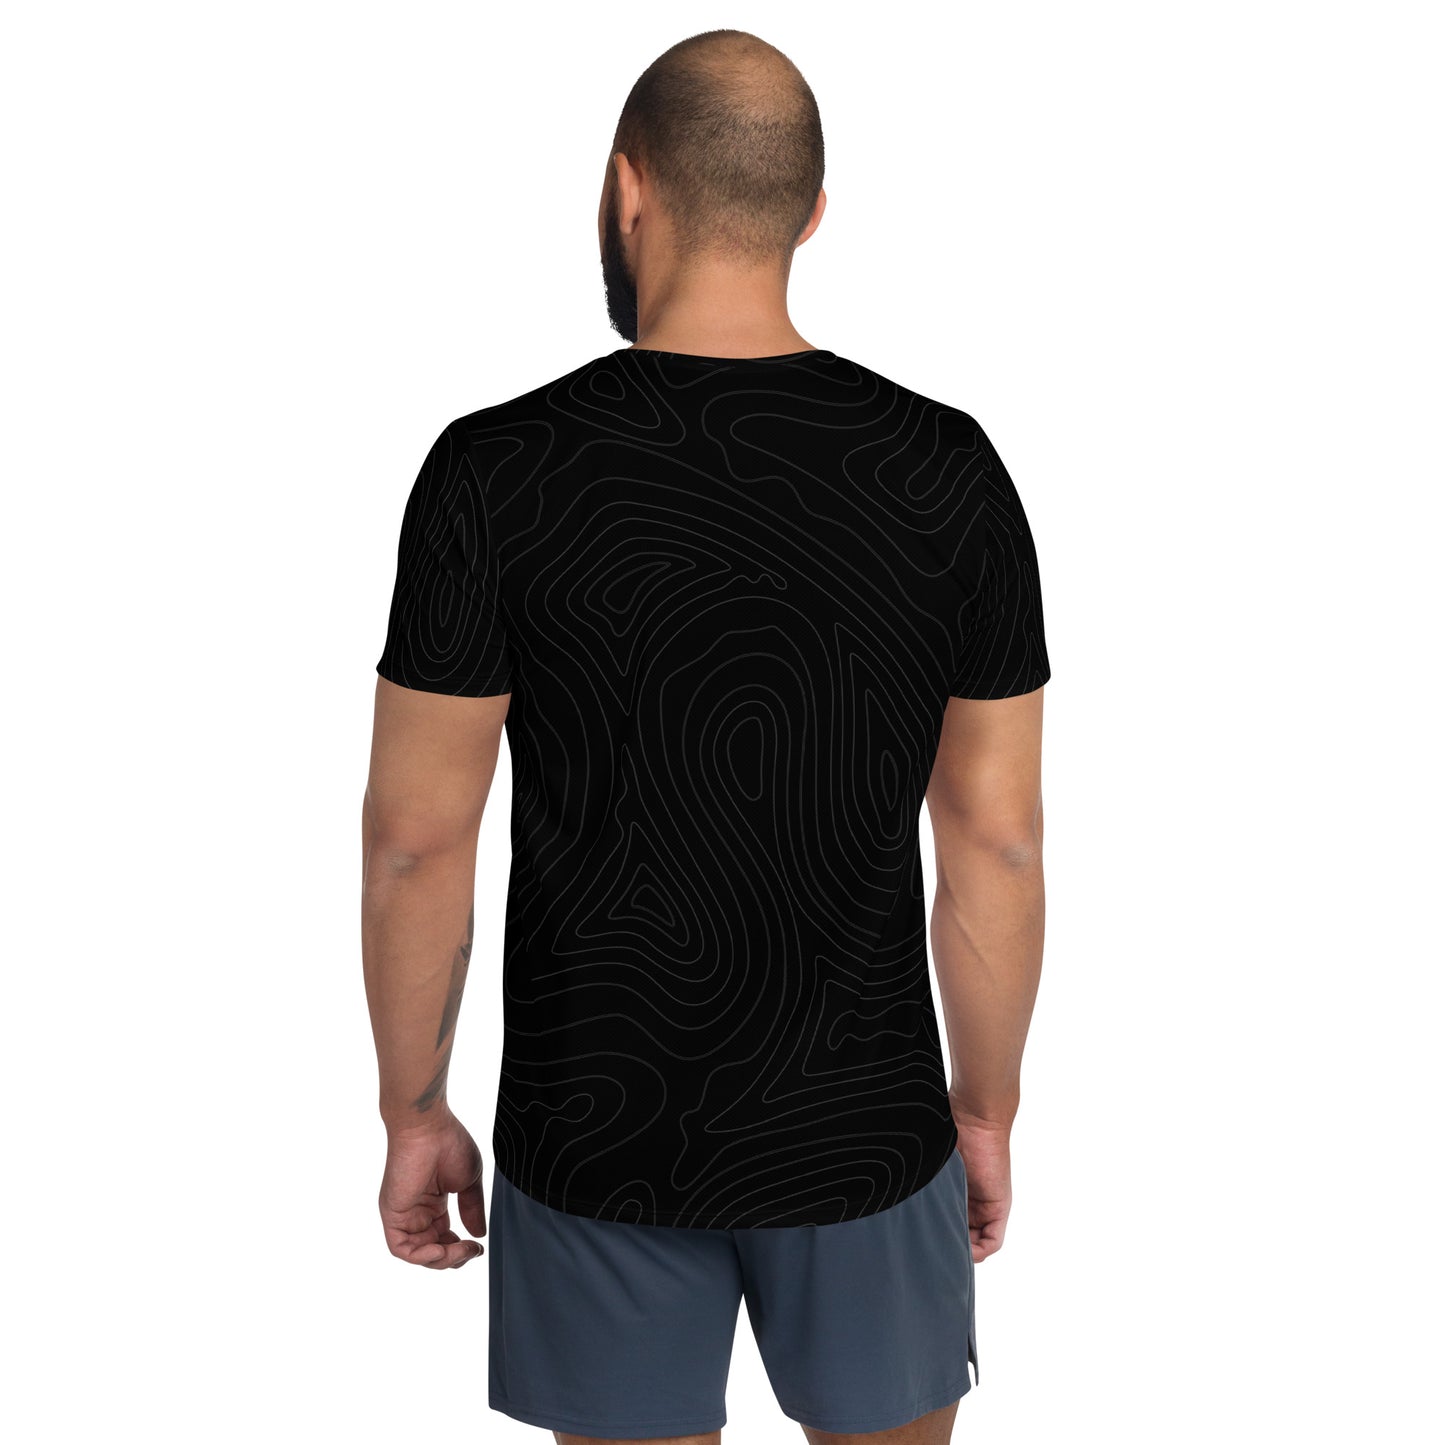 TIME OF VIBES - Men's Athletic T-shirt MOVE PUR (Black) - €45.00